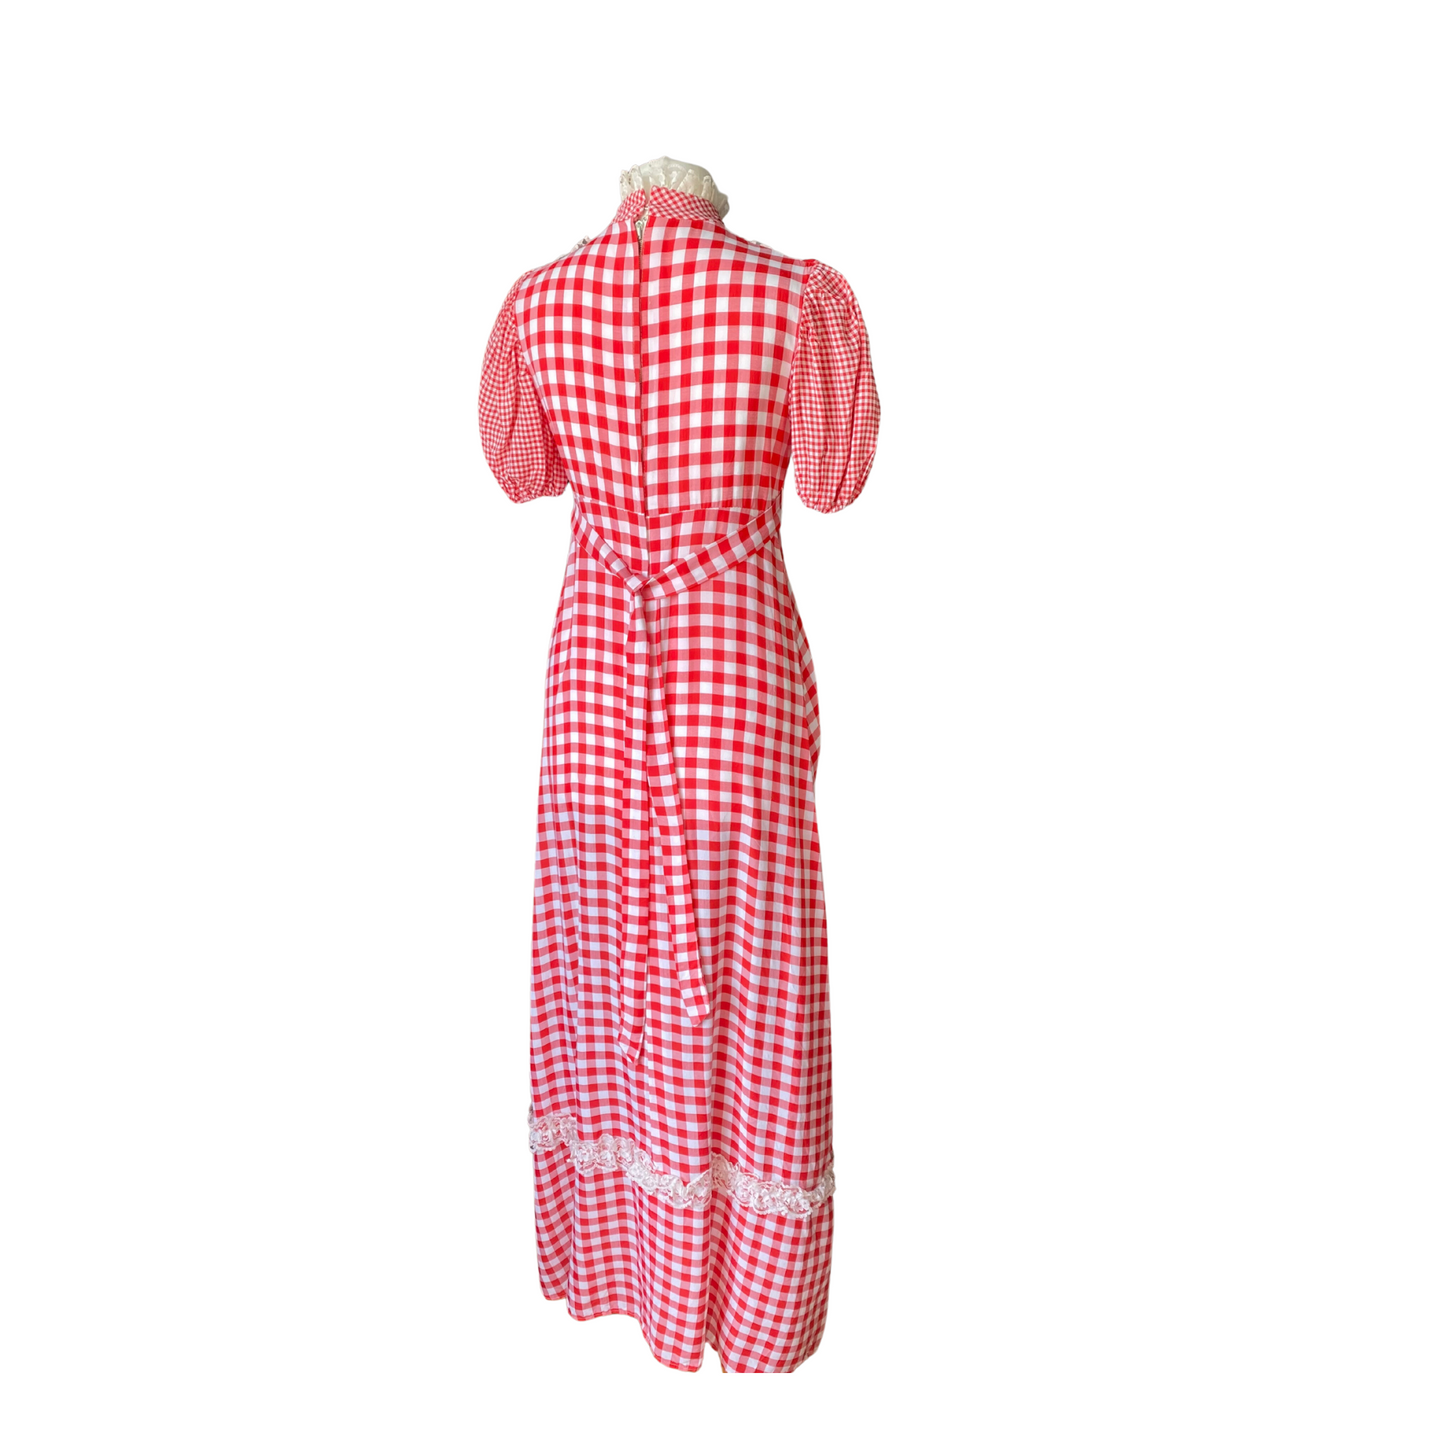 70s red and white gingham, puffed sleeved maxi dress. Approx U.K. size 8